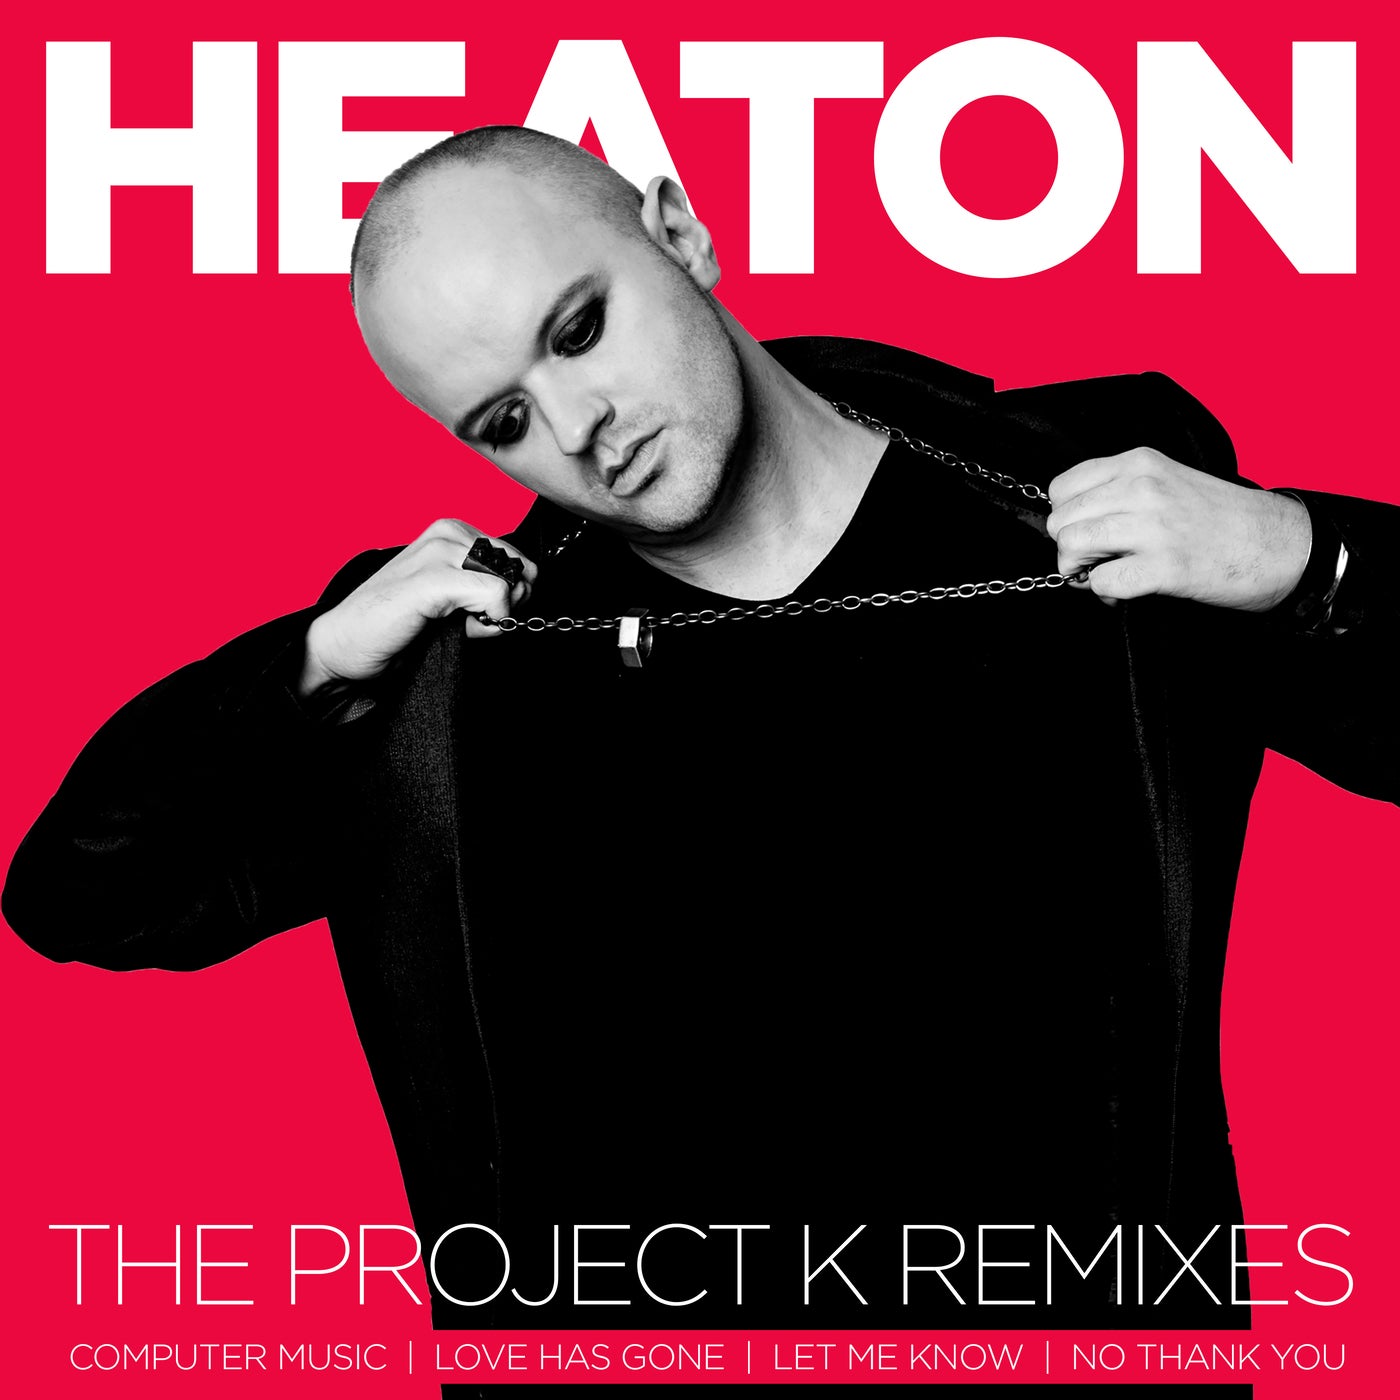 The Project K Remixes